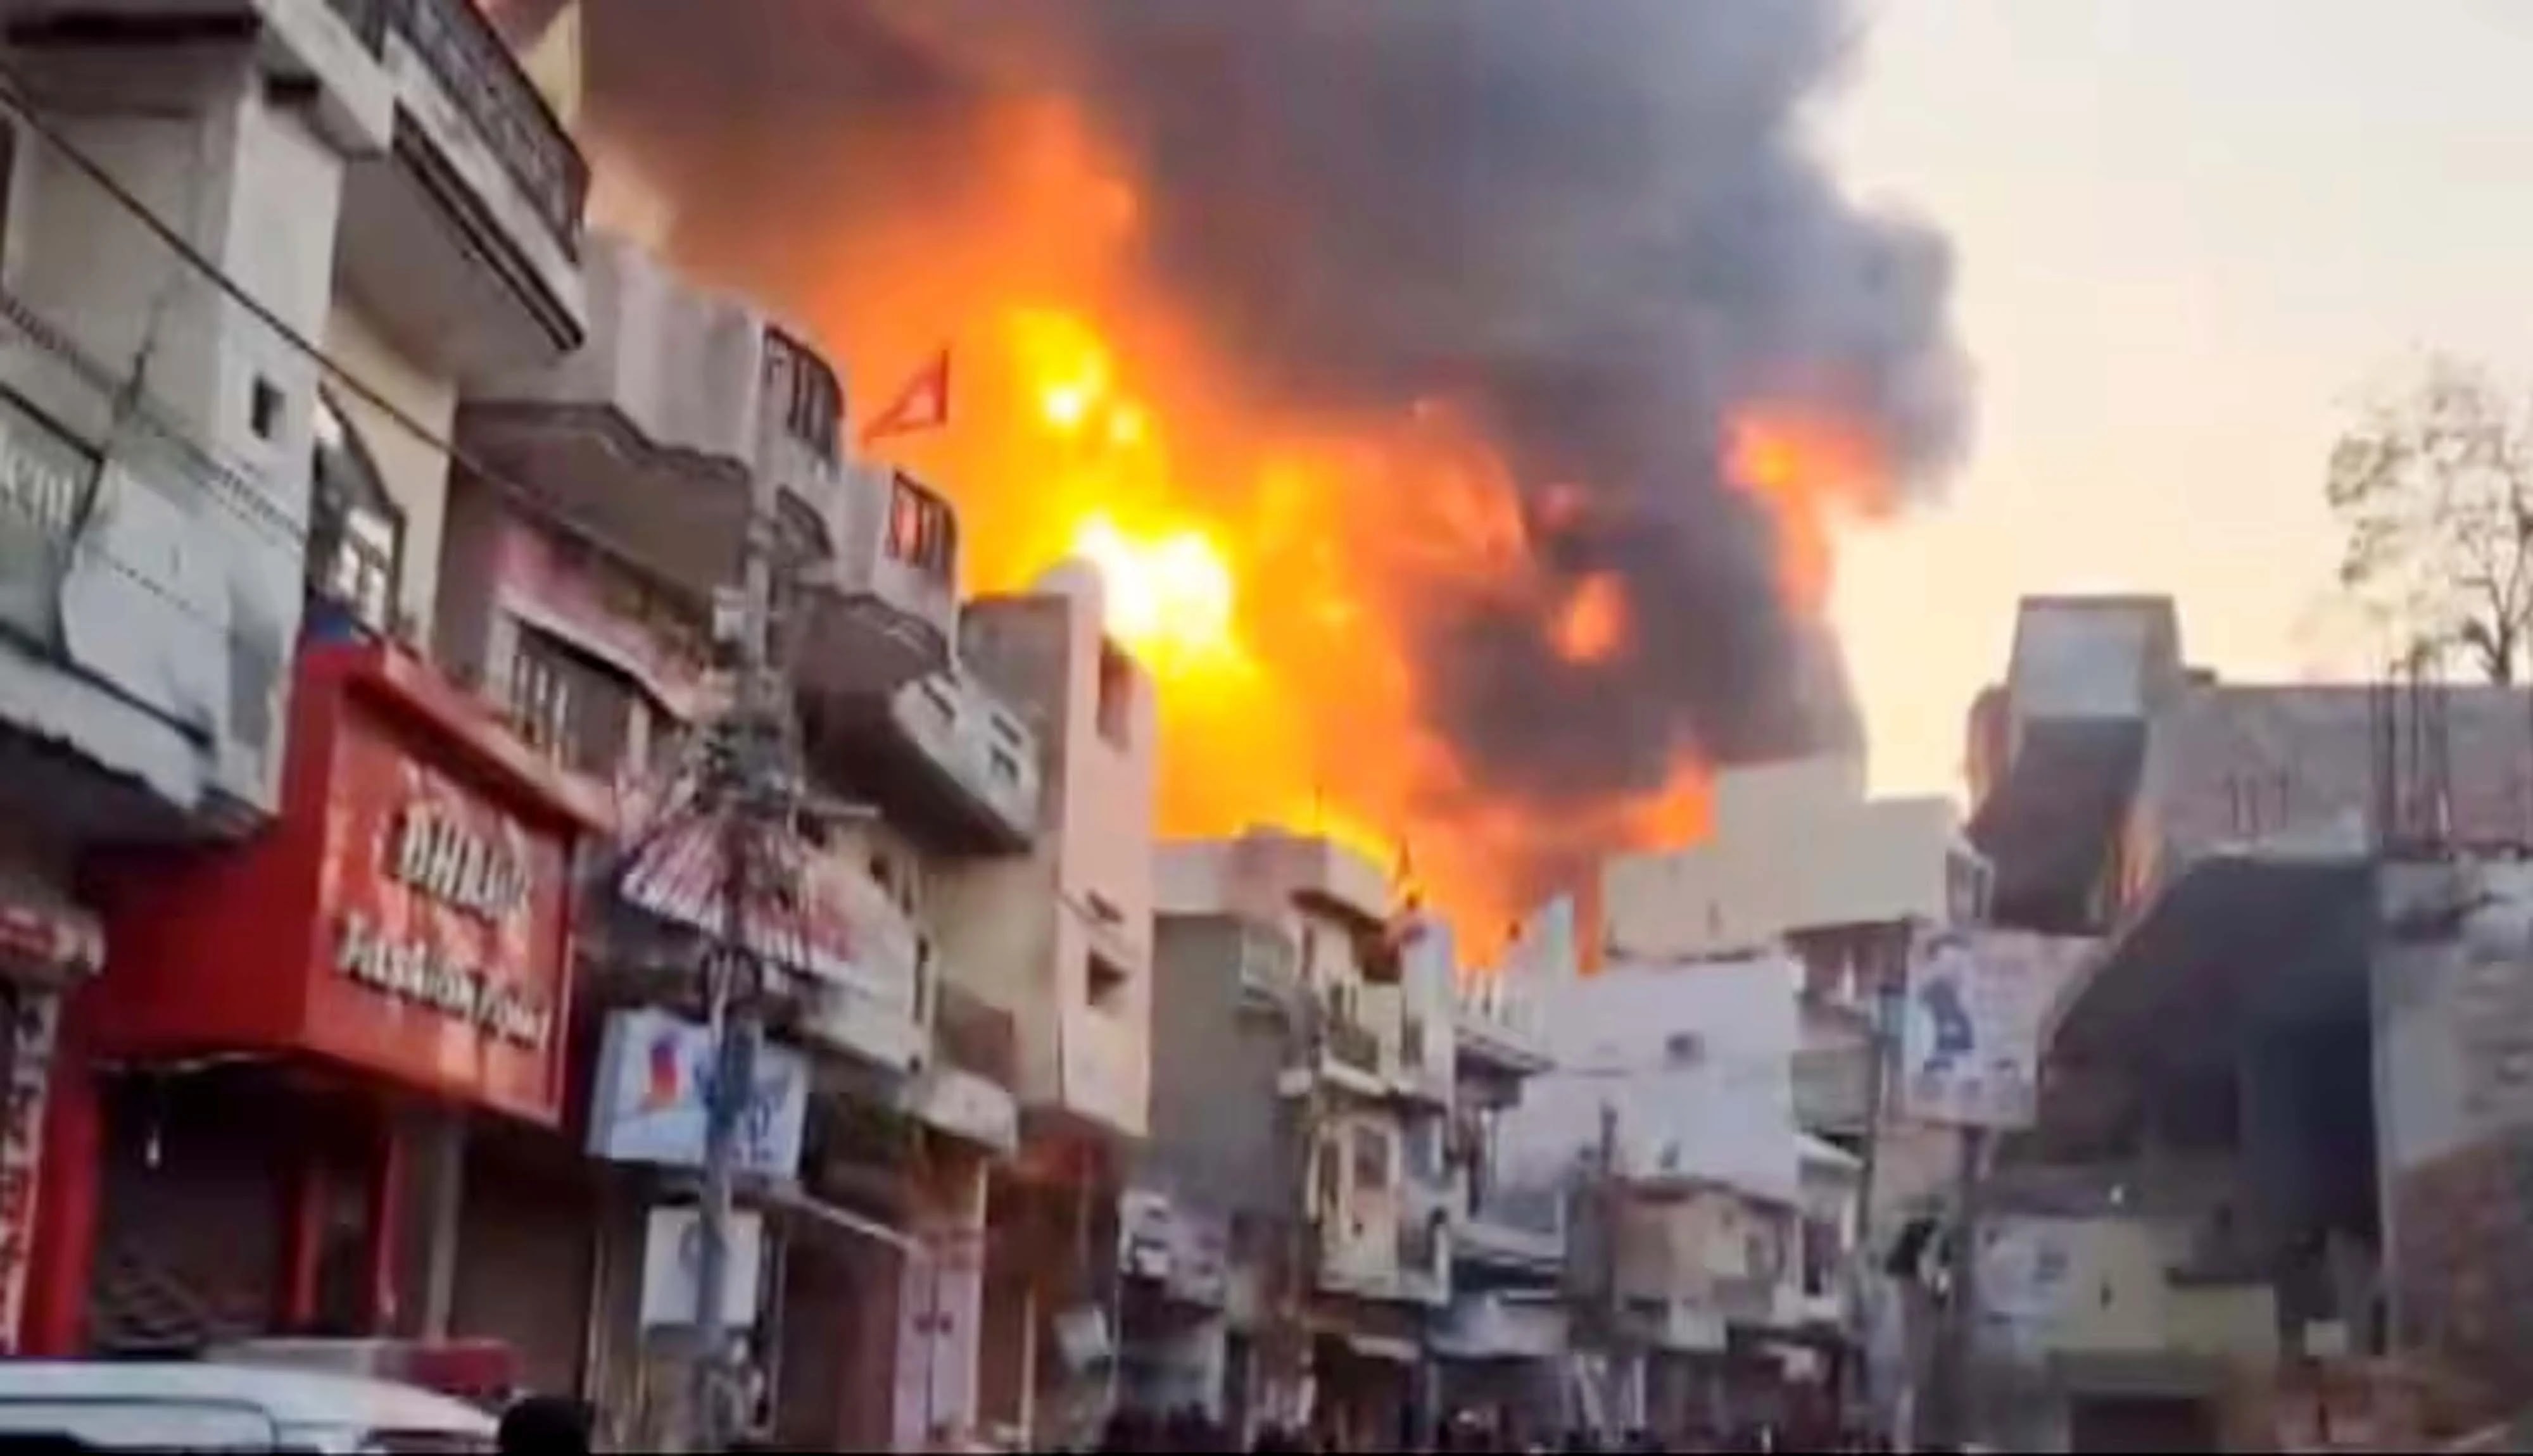 Saiwal: Fire broke out in more than 100 shops